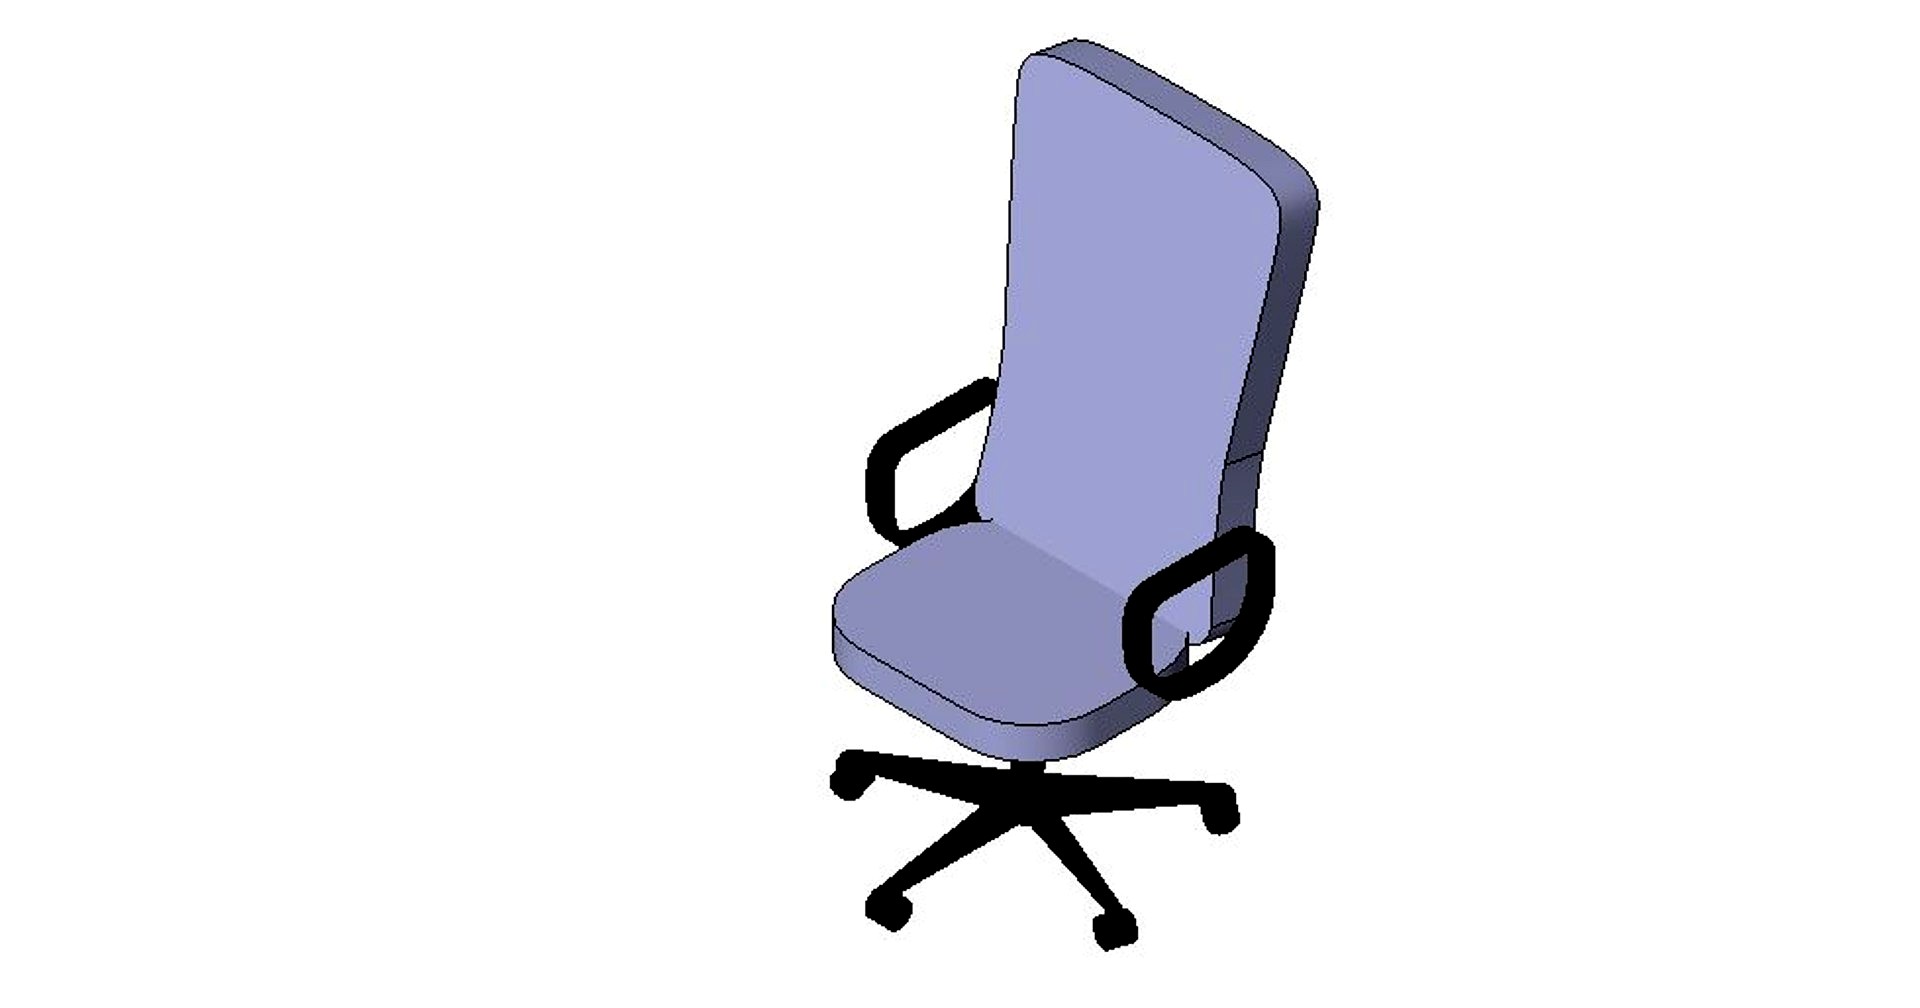 Executive chair Revit 2012 (with material parameters)